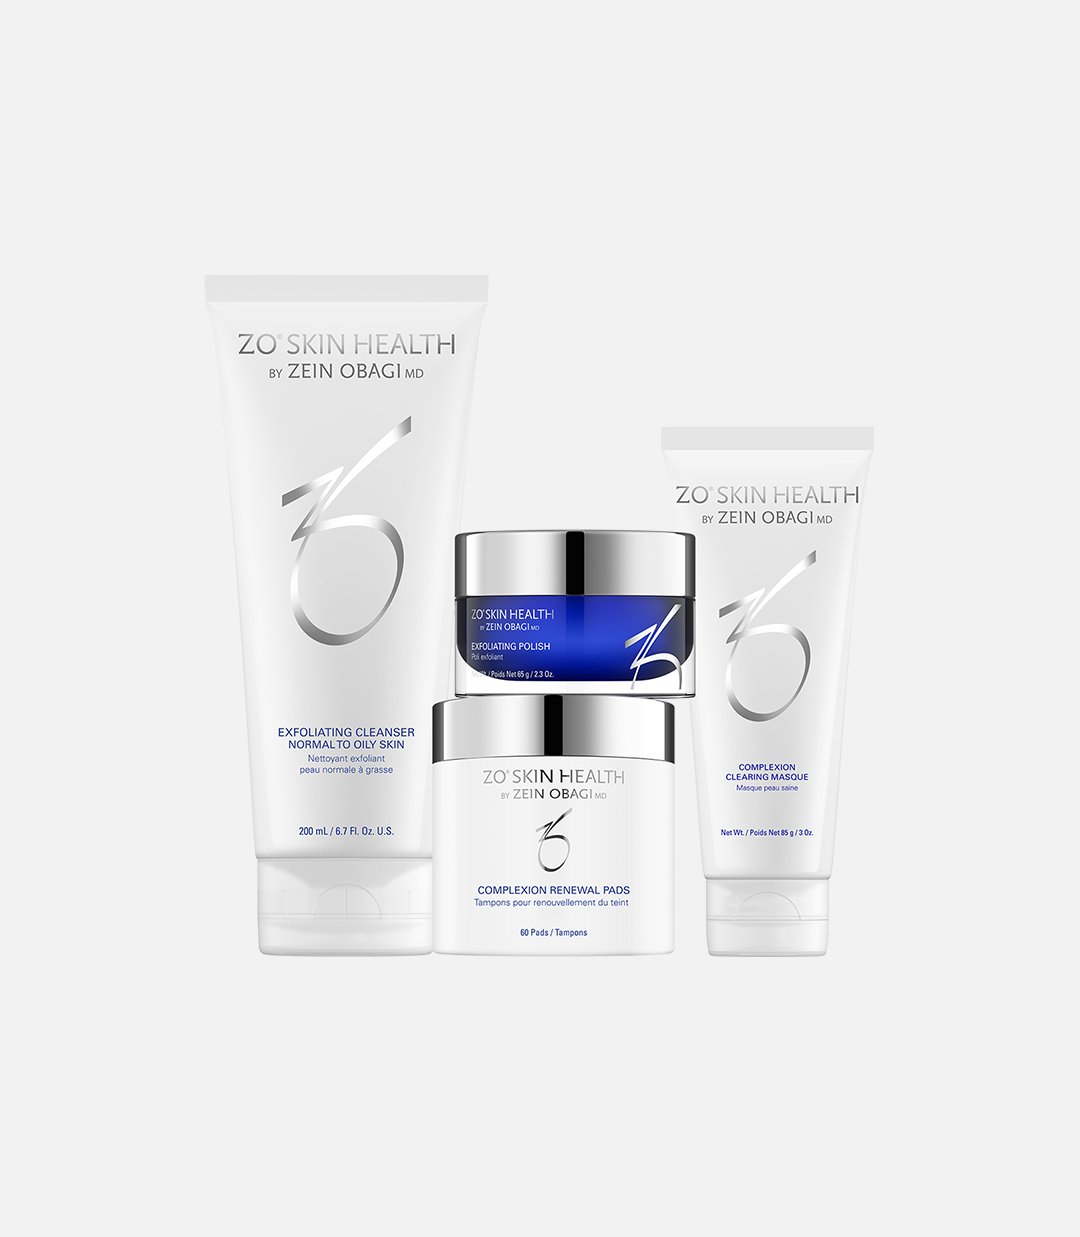 ZO Skin Health - Complexion Clearing Program